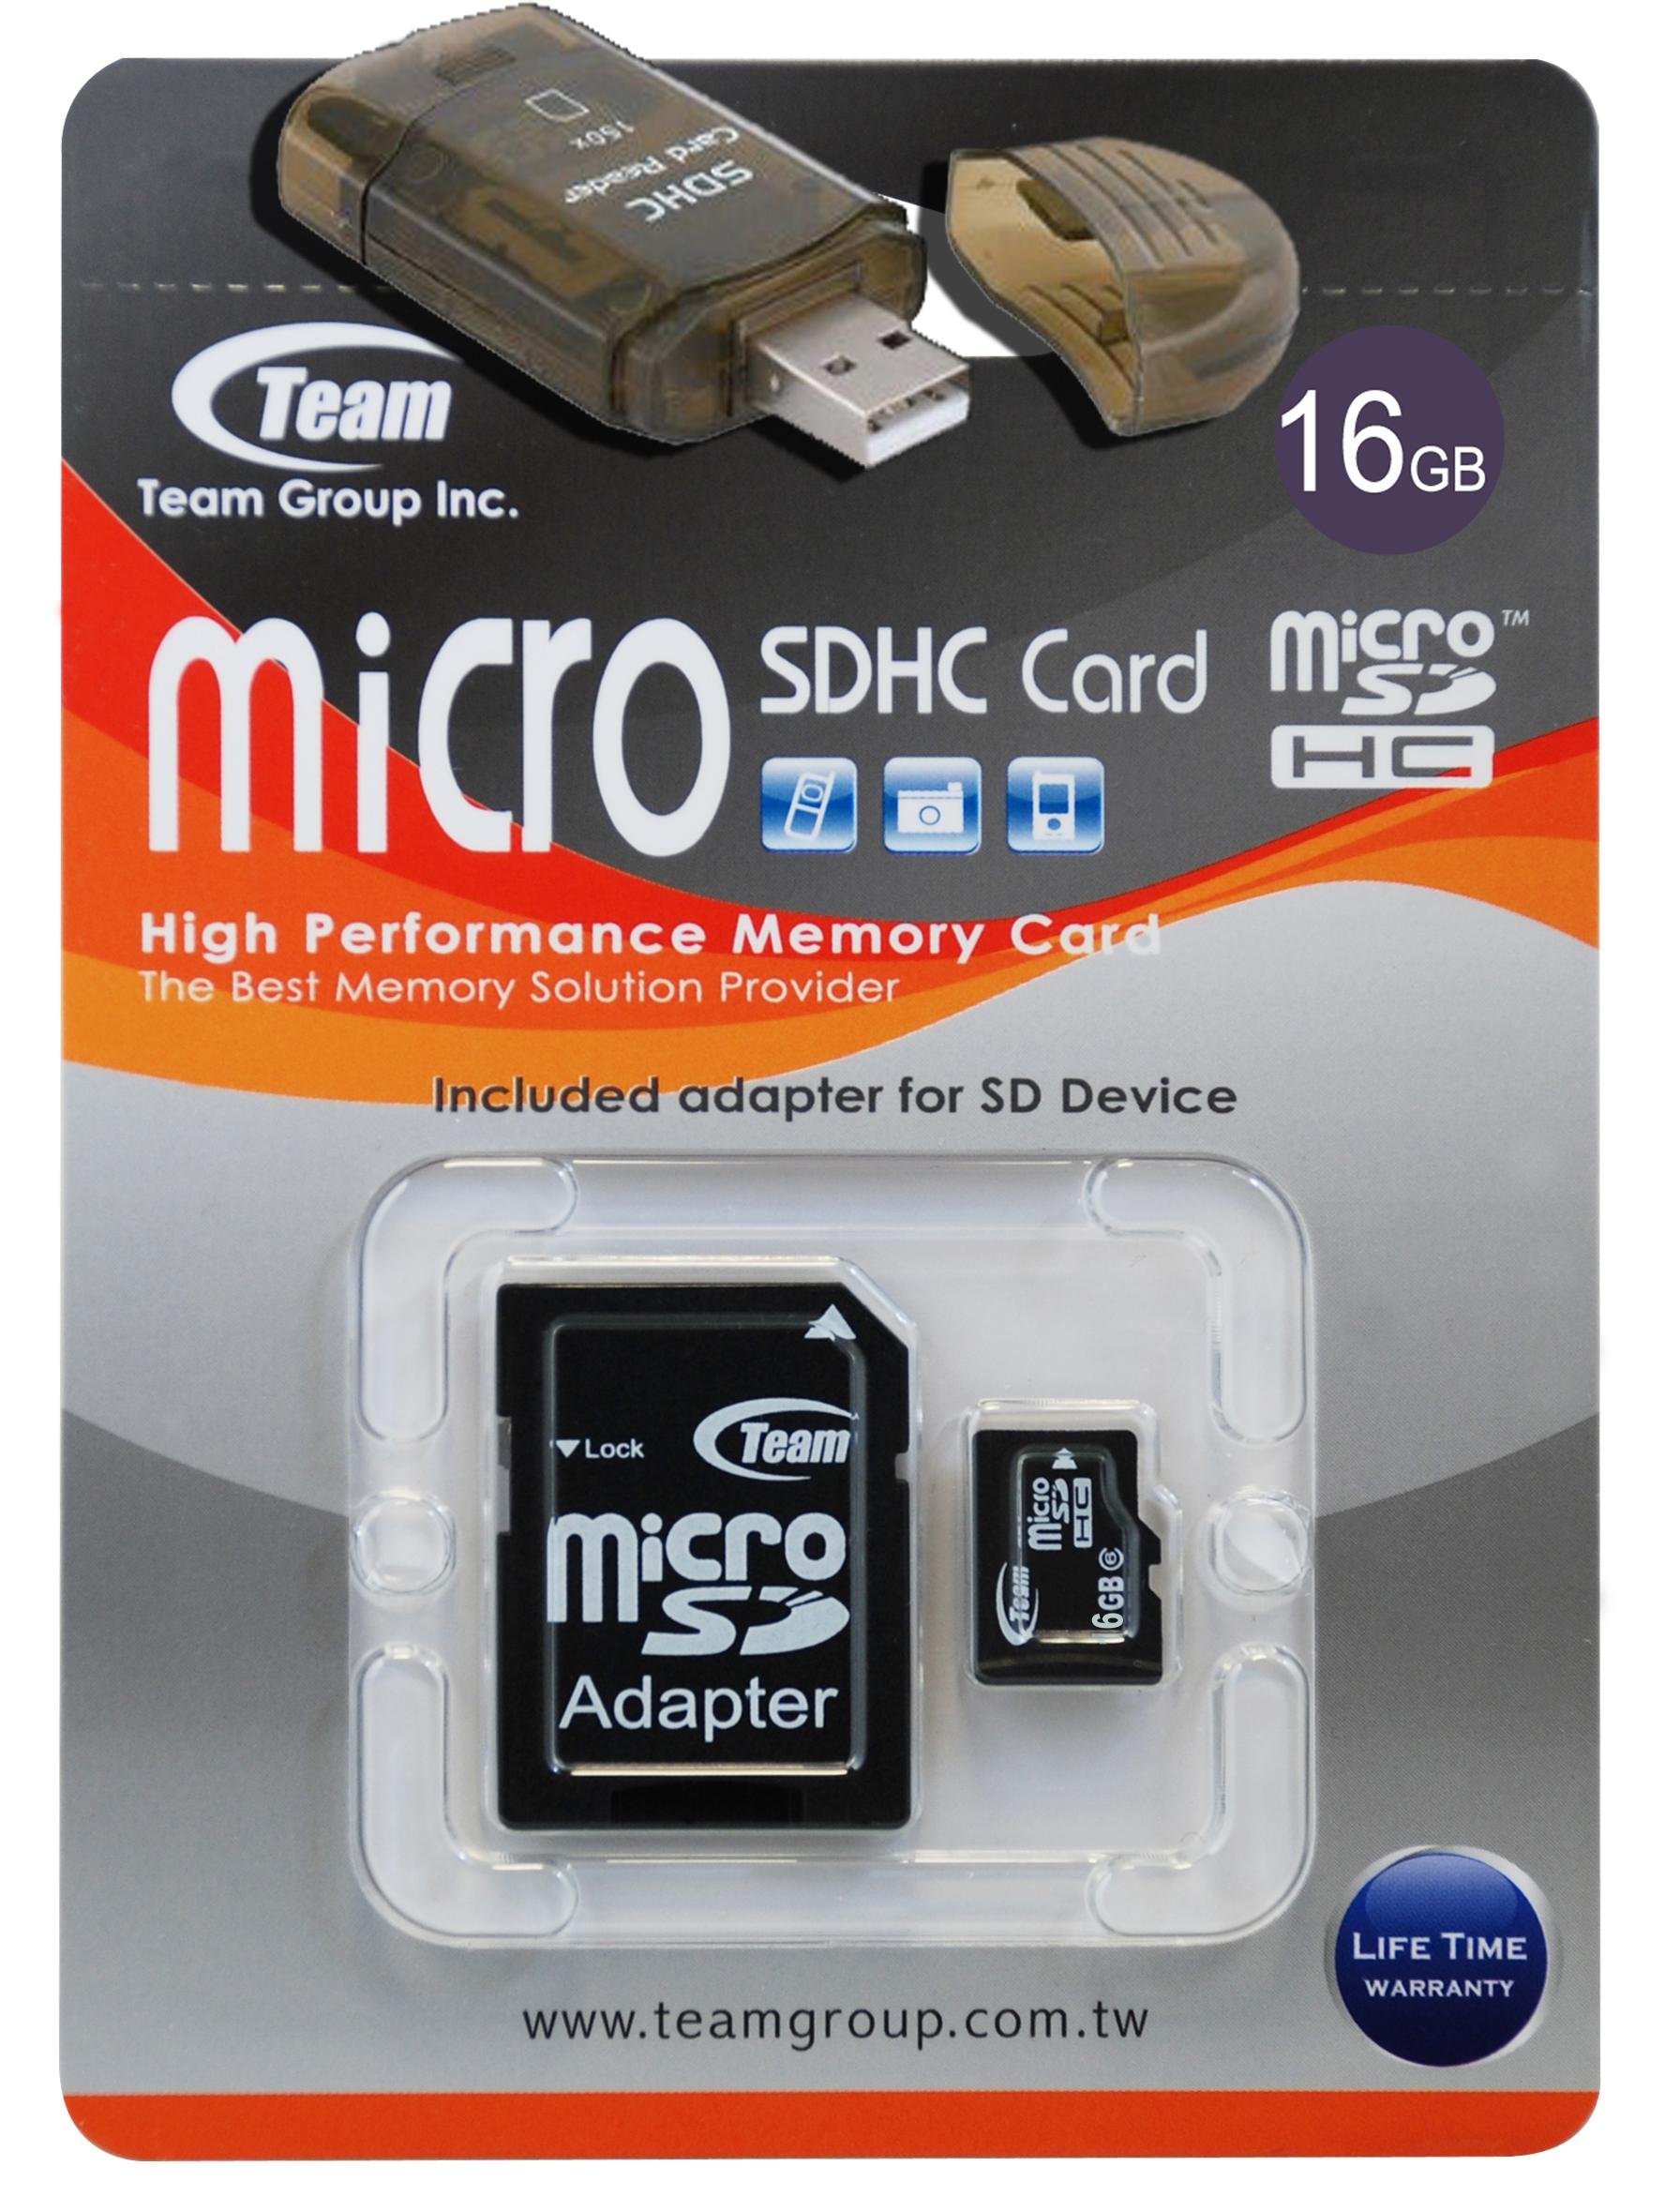 16GB Turbo Speed Class 6 MicroSDHC Memory Card For SPRINT LG LX370 LG RUMOR2. High Speed Card Comes with a free SD and USB Ad